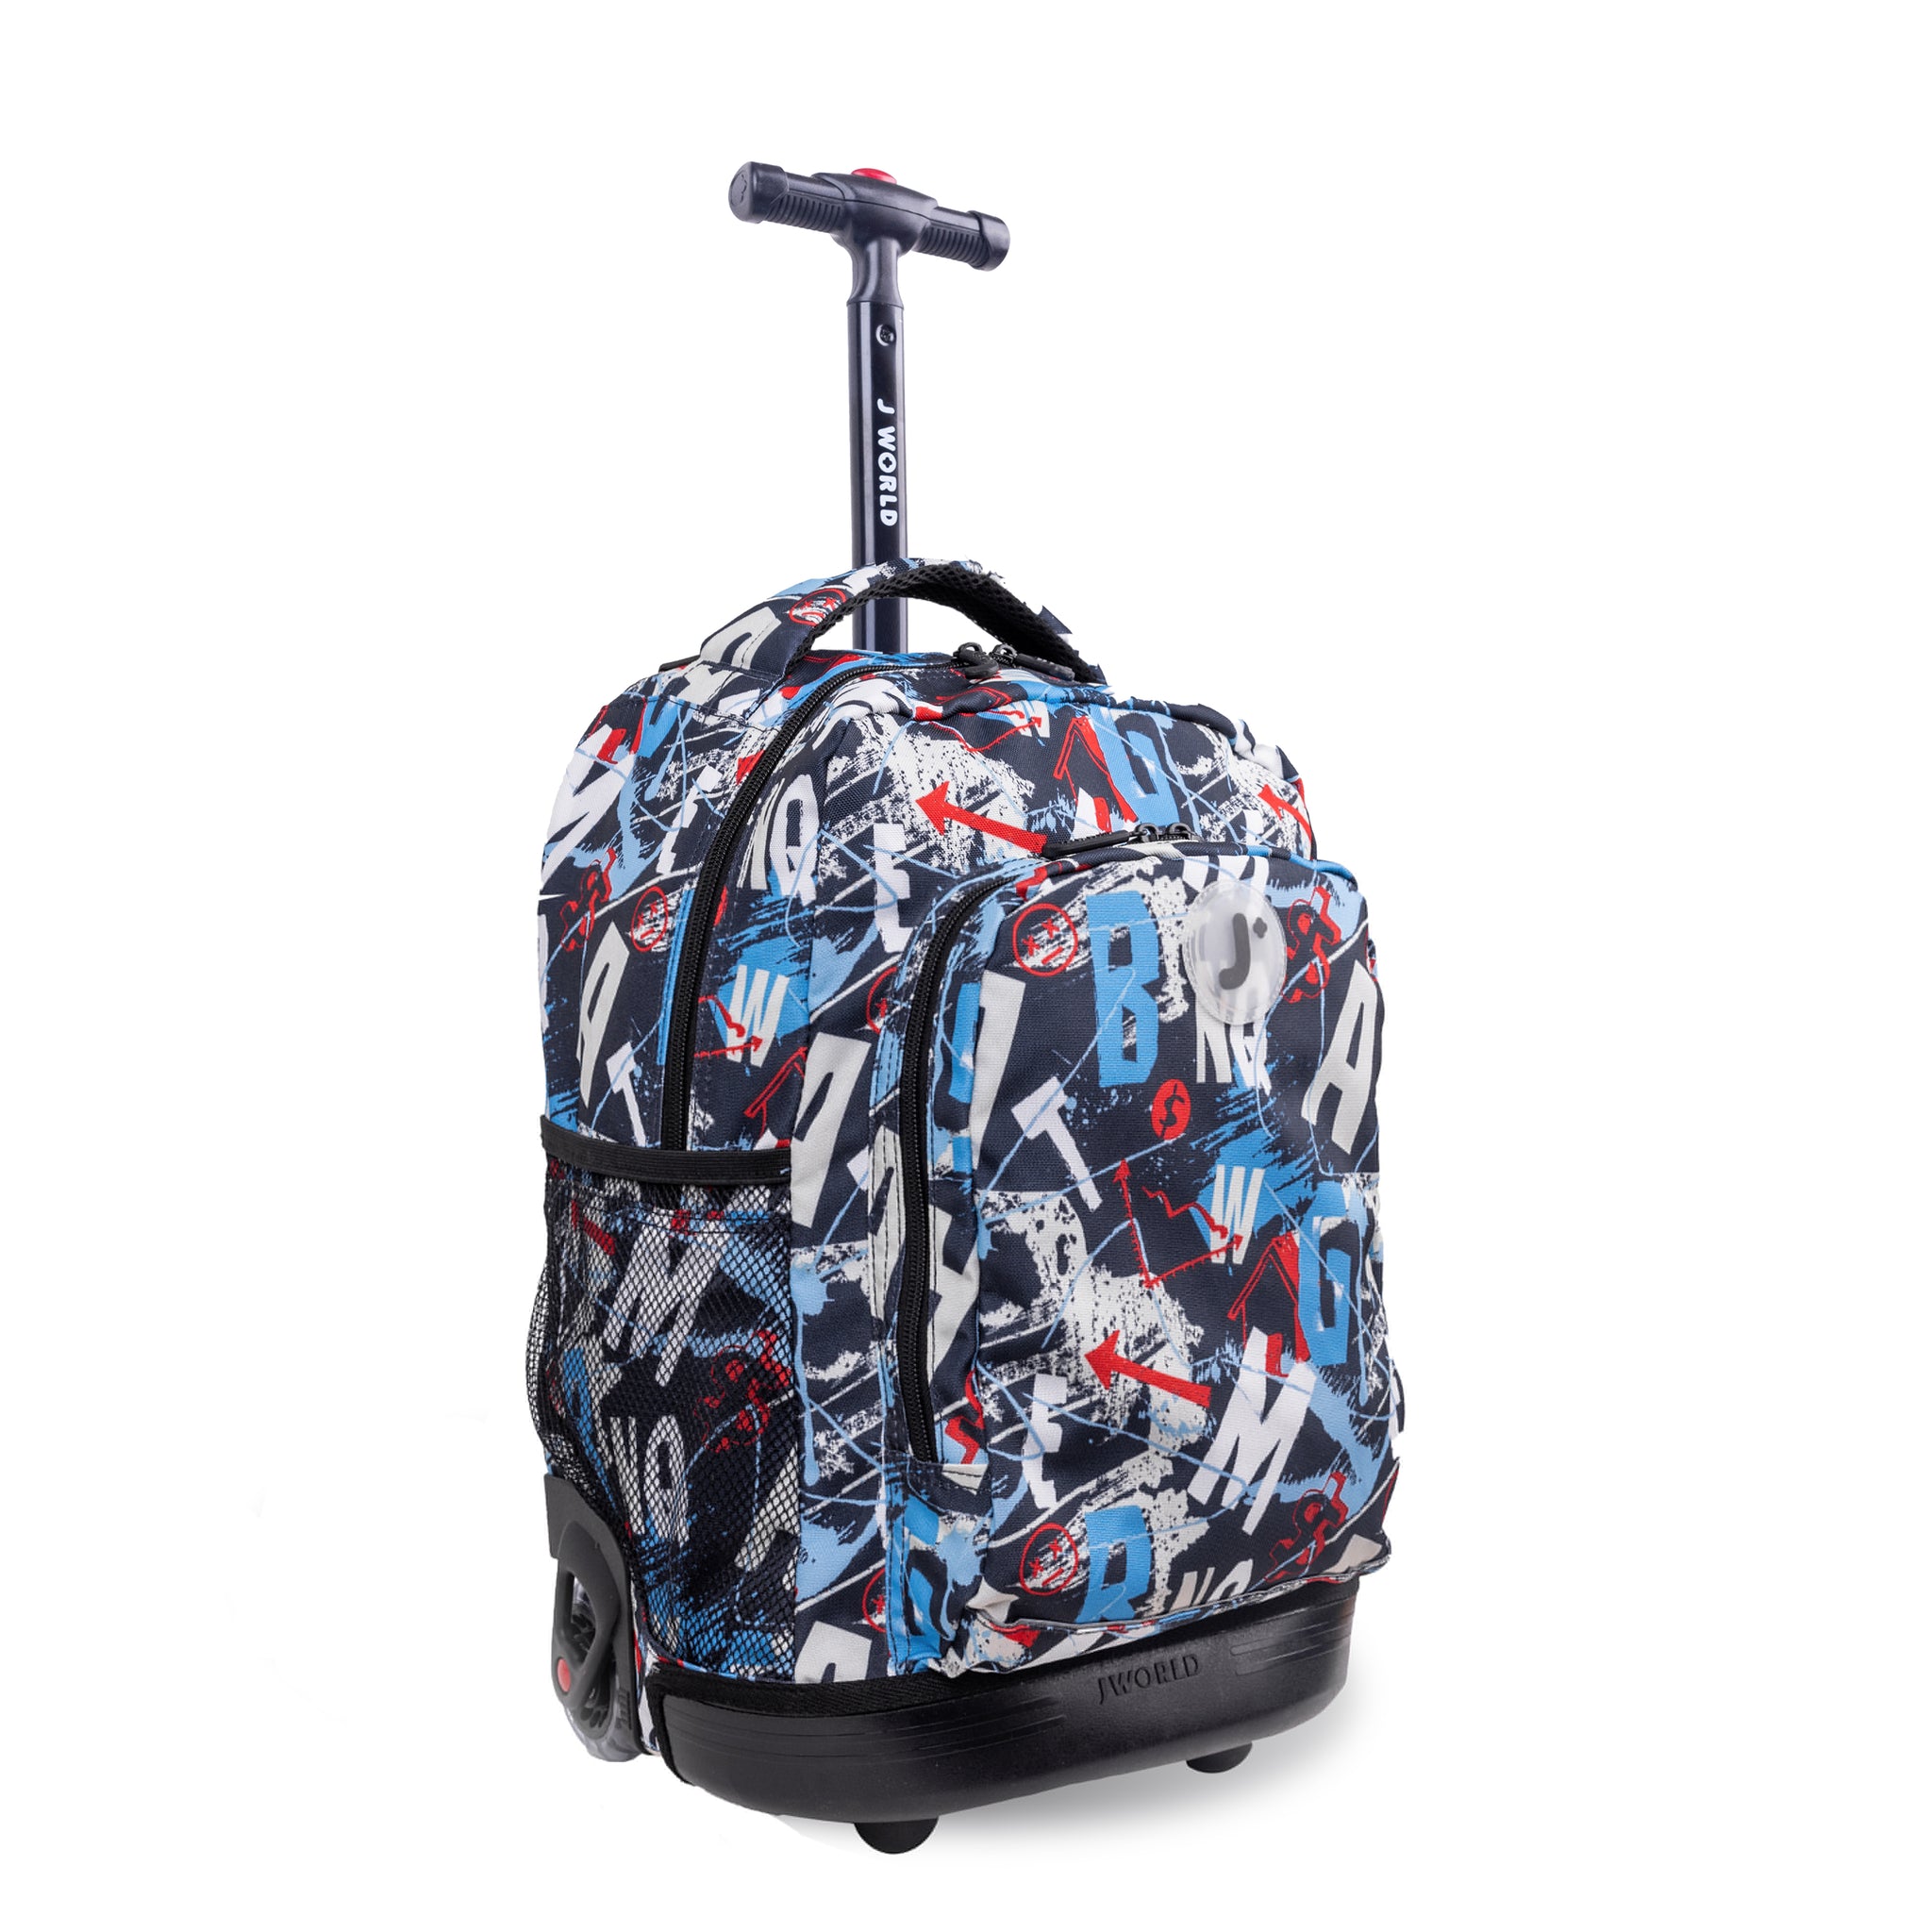 J World Boys and Girls Sunny 17" Kids Rolling Backpack for School and Travel, Graffiti